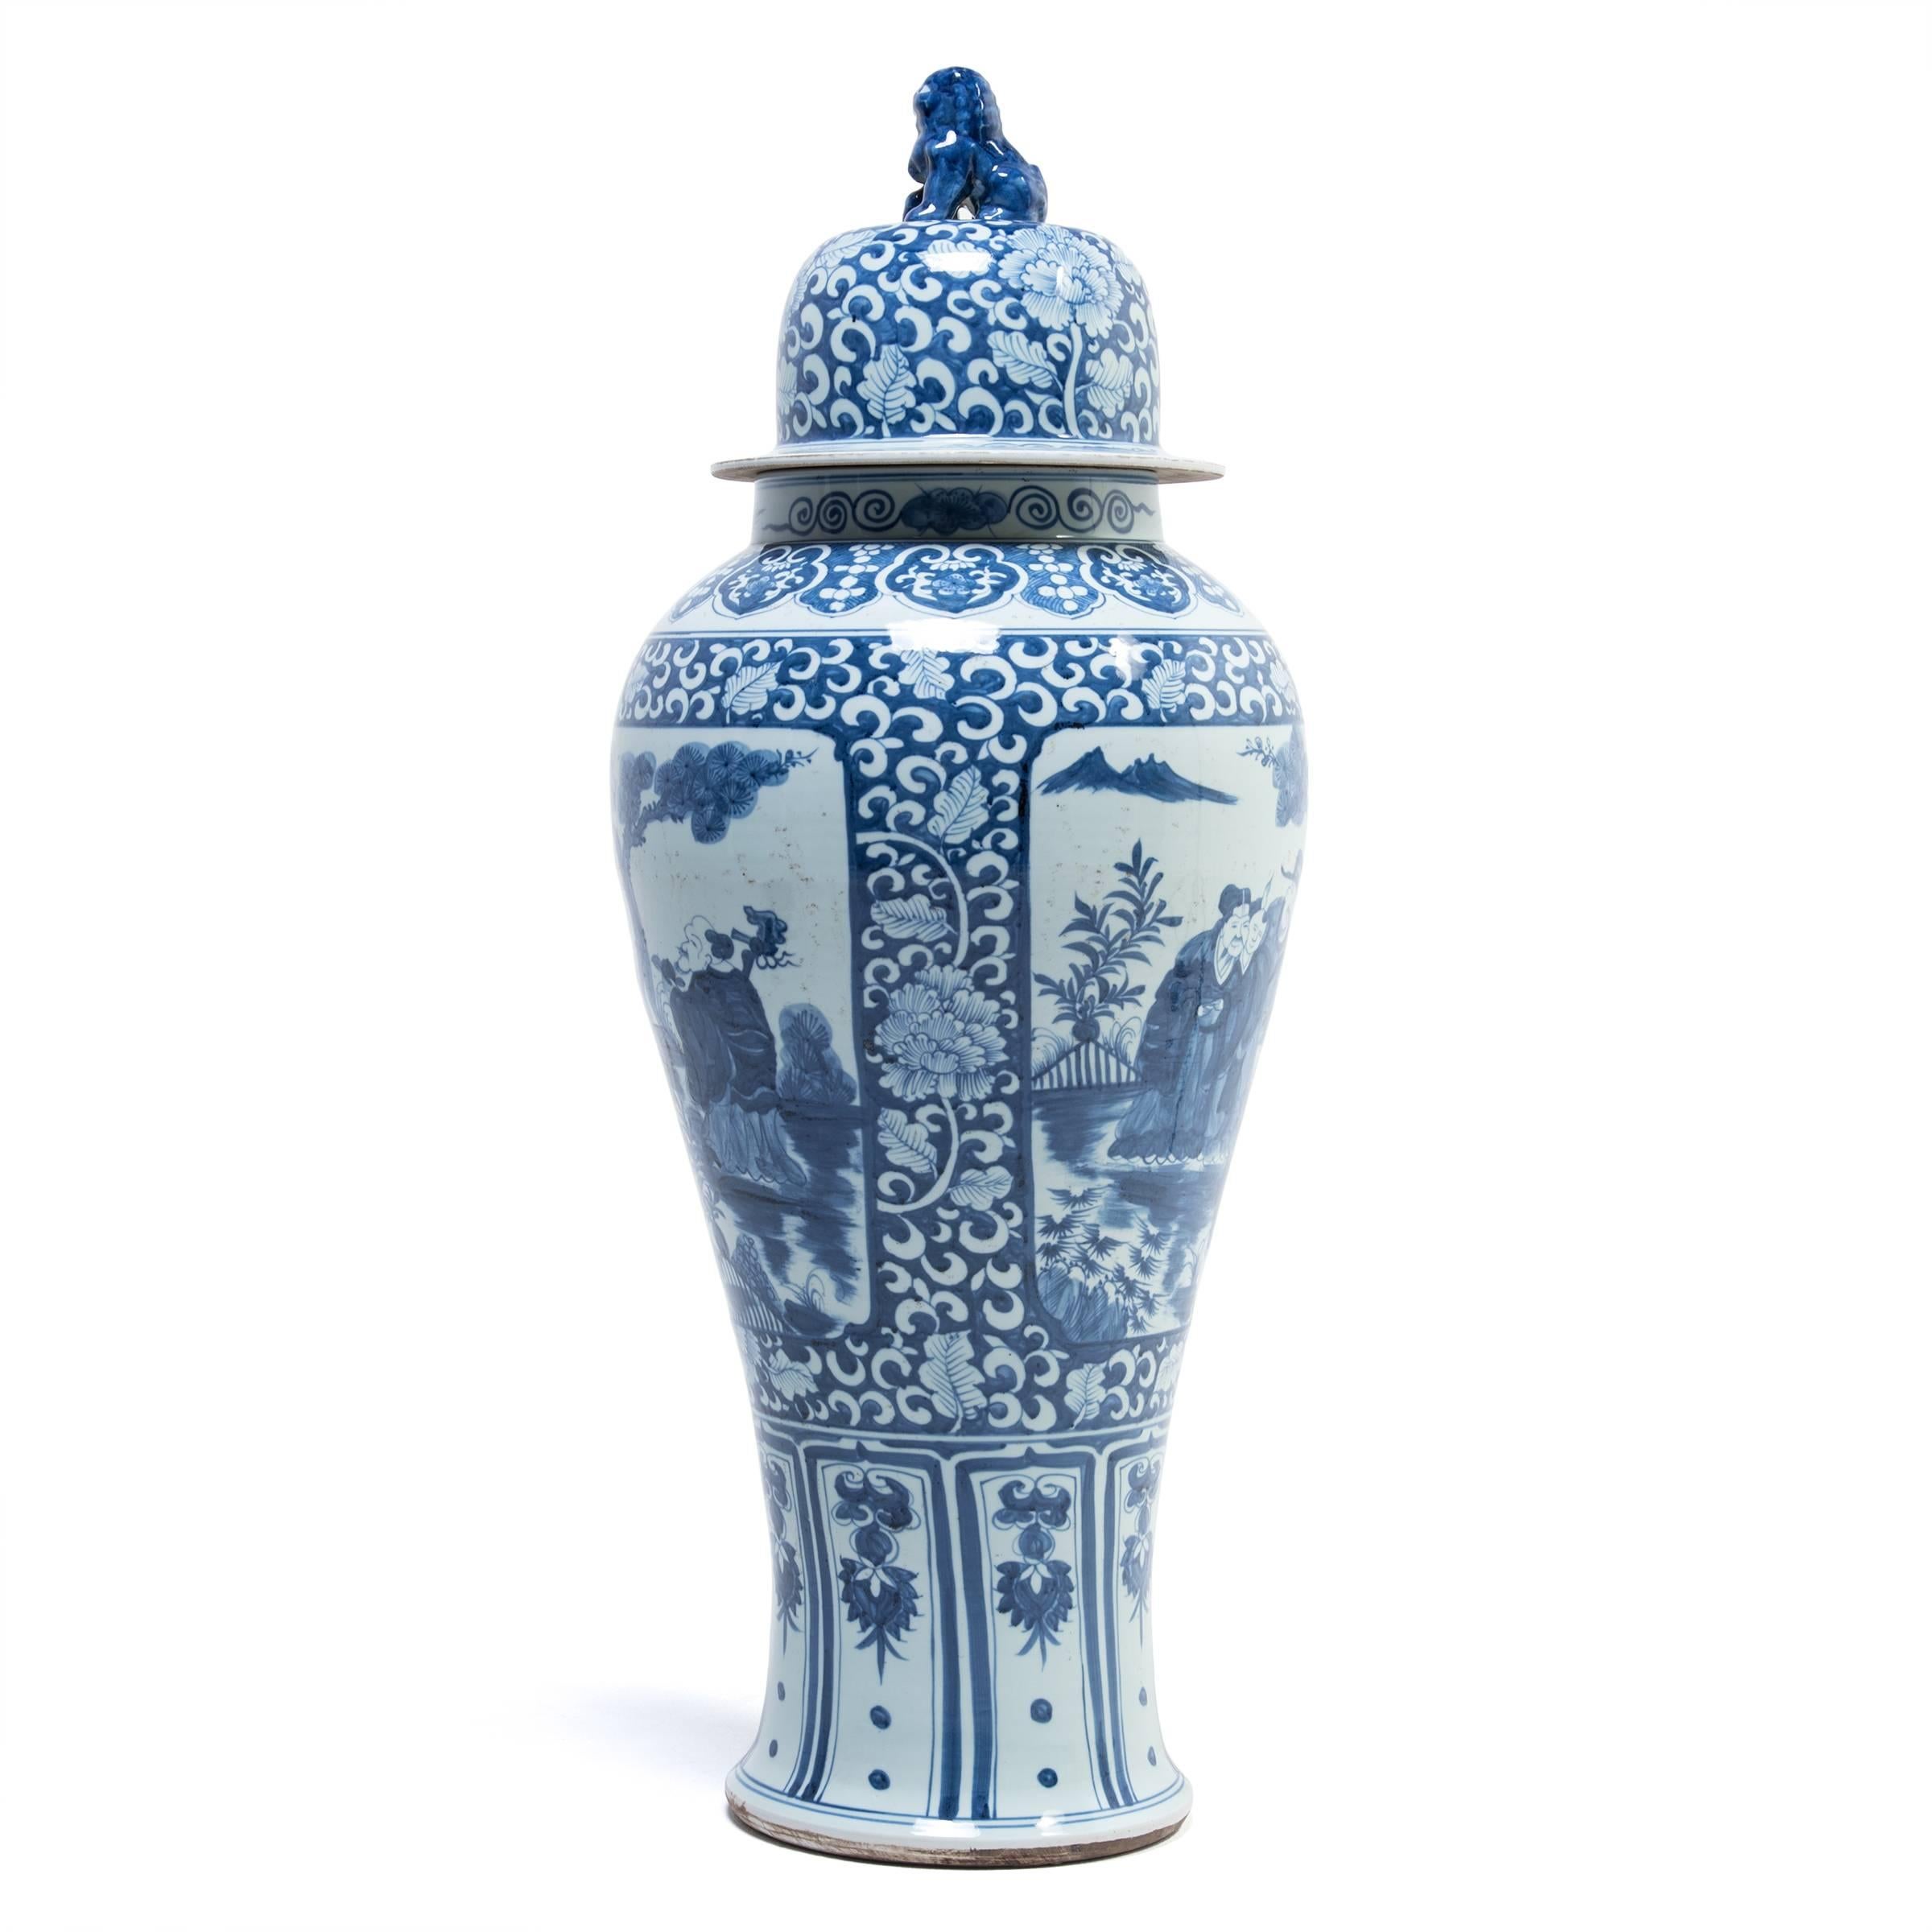 Chinese Blue and White Ginger Jar with Shizi and Landscape Portraits